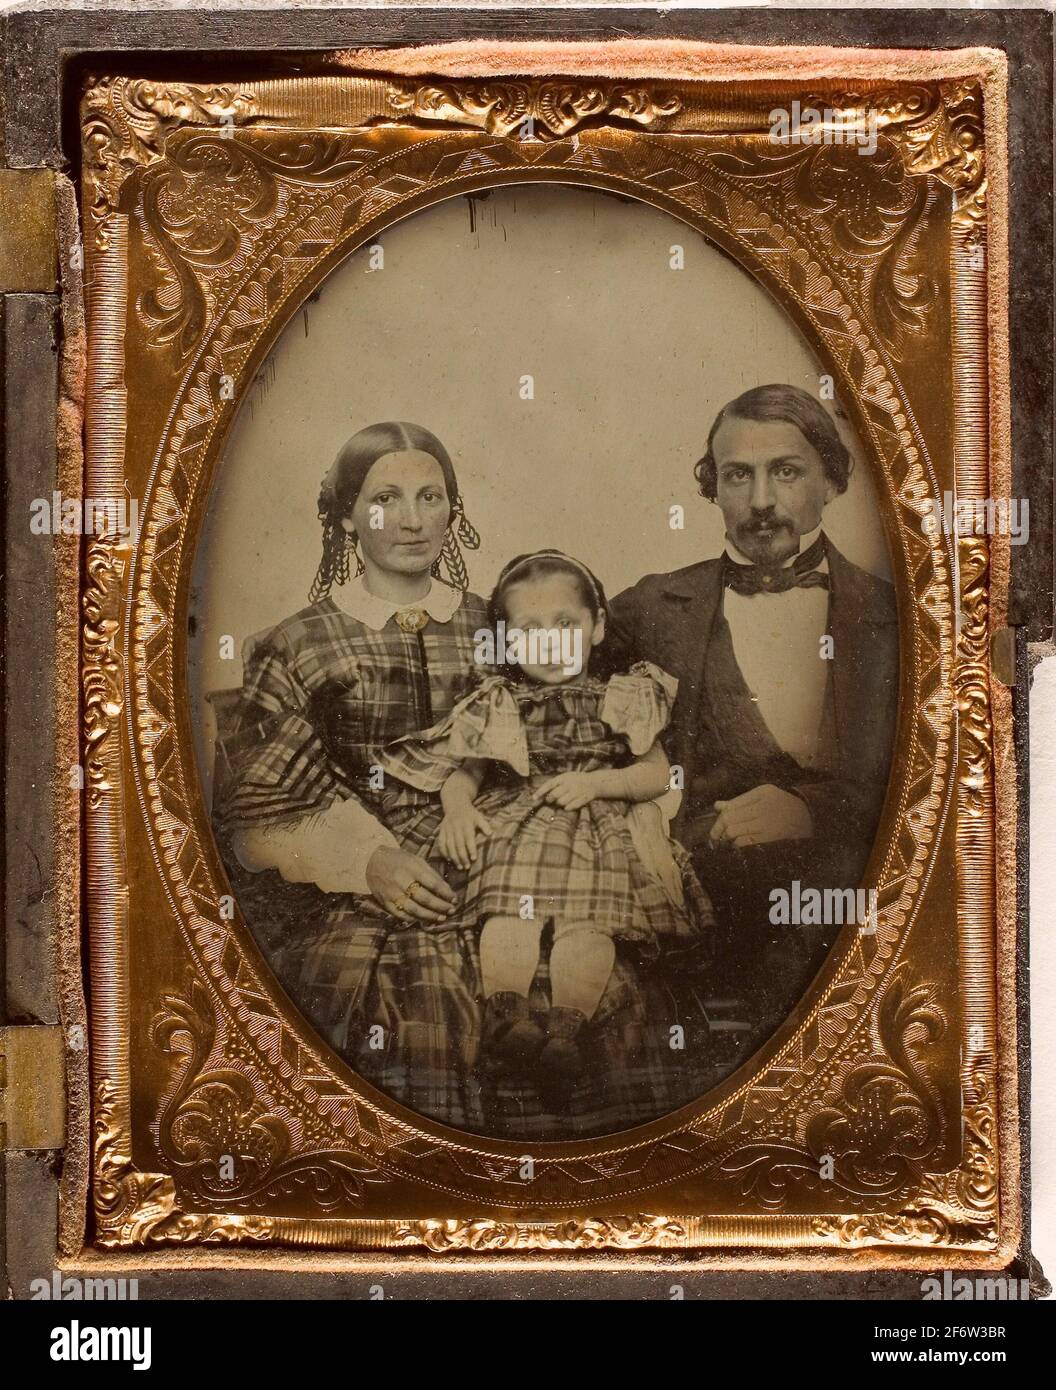 Author: Unknown. Untitled - 19th century - Artist unknown. Daguerreotype. 1840 - 1900. Unknown Place. Stock Photo